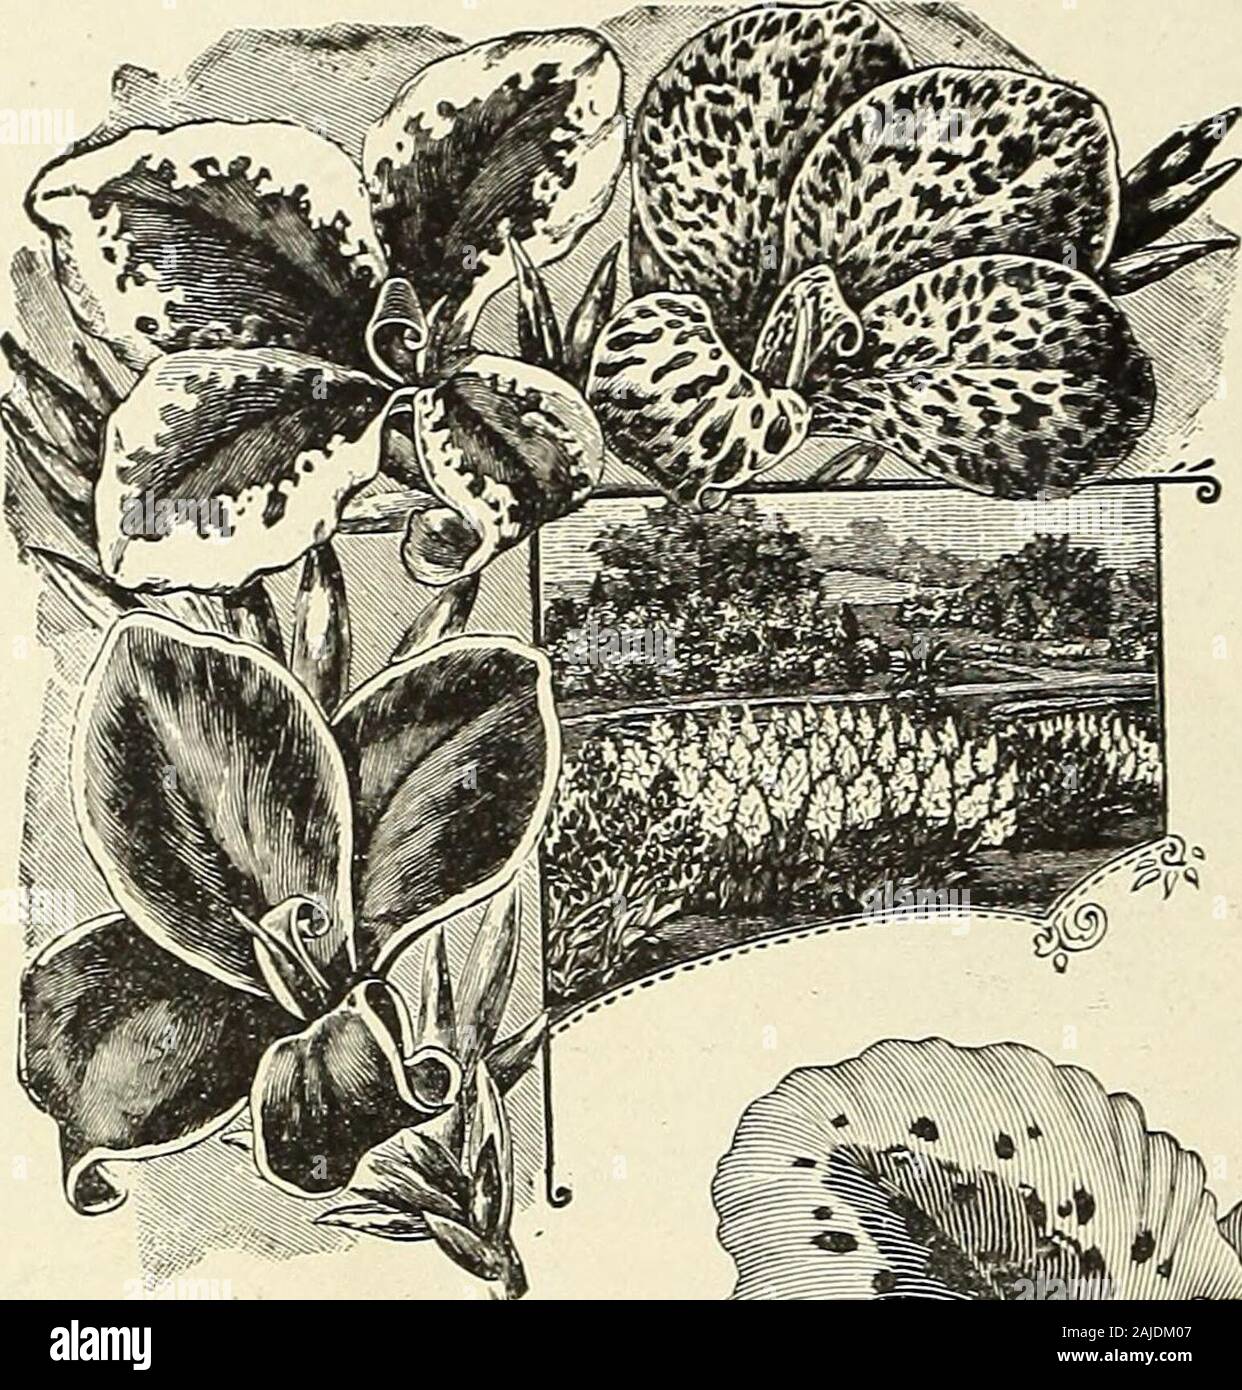 H.W Buckbee seed and plant guide : 1905 . nd enjoy the sweet fragrance of the orange blossoms asThe oranges are a sight that is inspiring as they hangI have grown a large stock of clean, healthy plants thatnee. 30c. each; larger plants. 25c. DONT MISS THE GORGEOUS PAEONIES. SEE PAGE 127. 114 H. W. BUCKBEE, ROCKFORD, ILLINOIS. Large Flowered French and Italian The Latest Creations. The Finest Varieties, CANNAS. Souv. de Antoine Crozy—Three and one half feet. Flowers dazzling crimson-scarlet, bordered with golden yel-low. One of the finest varietiesknown. 10c. each; $1.00 per doz. Maidens Blush— Stock Photo